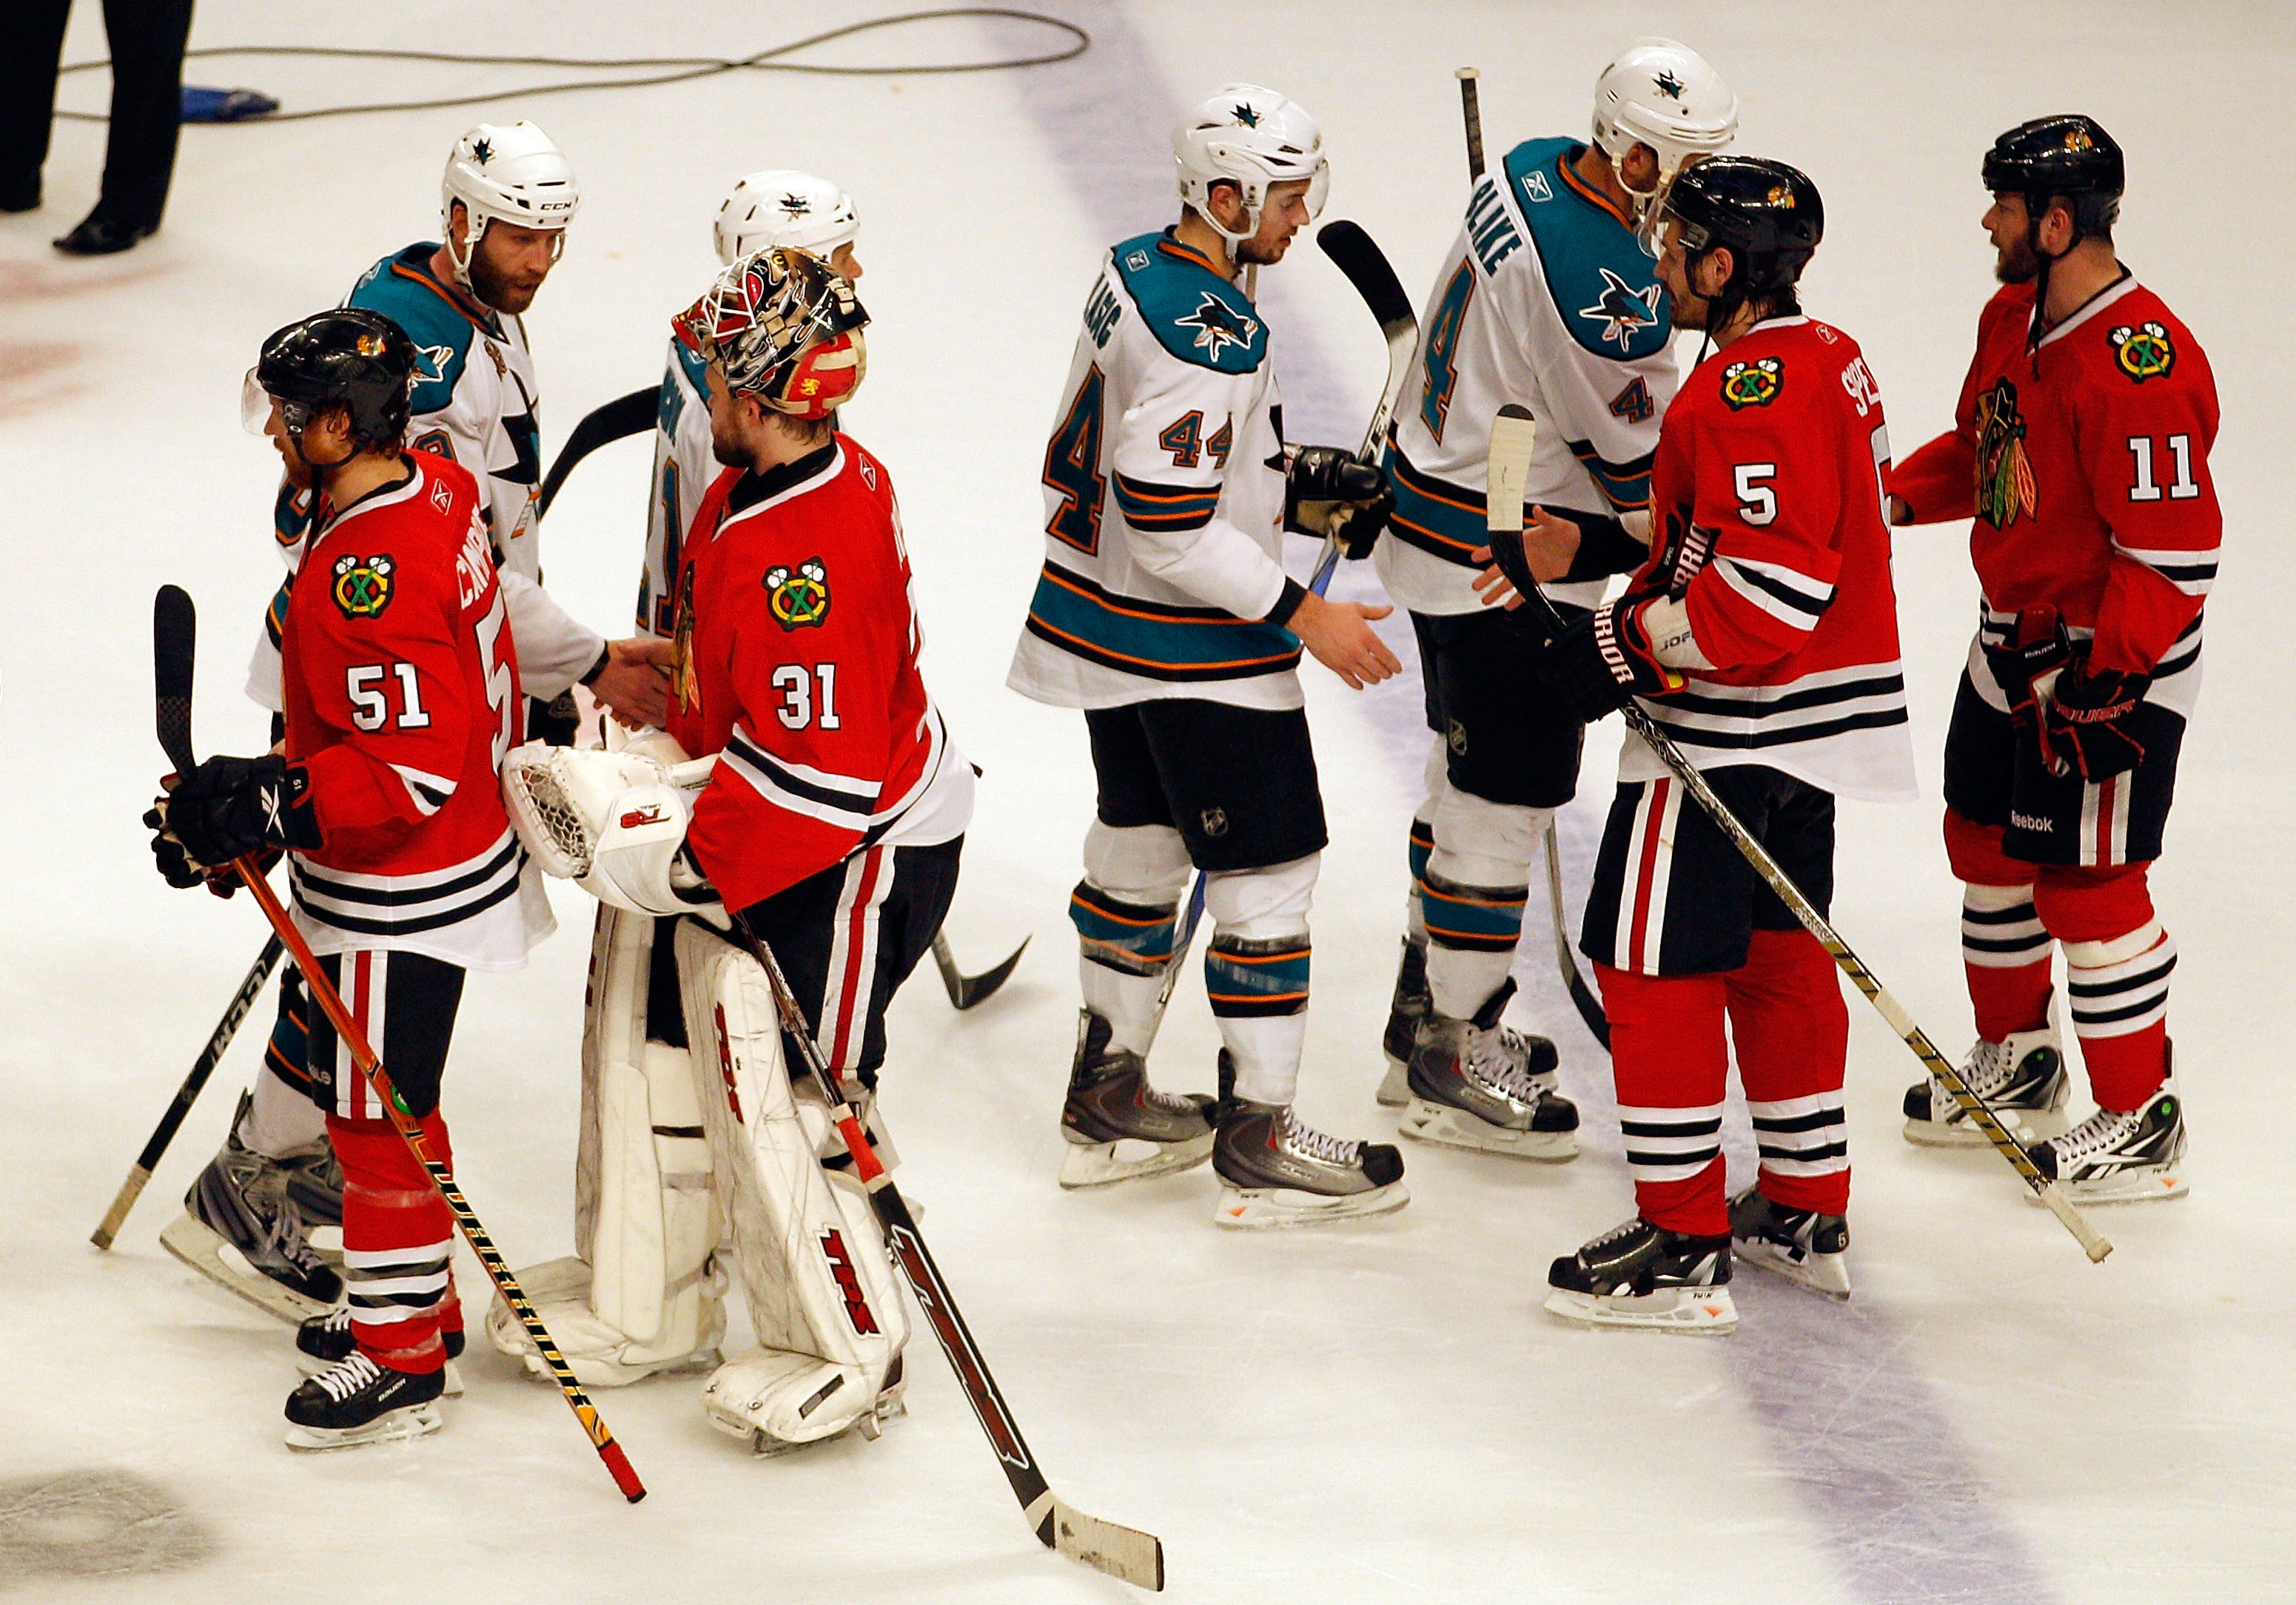 CHICAGO - MAY 23:  The Chicago Blackhawks shake hands with San Jose Sharks players after the Blackhawks 4-2 victory to advance to the Stanley Cup after winning Game Four of the Western Conference Finals during the 2010 NHL Stanley Cup Playoffs at the Unit